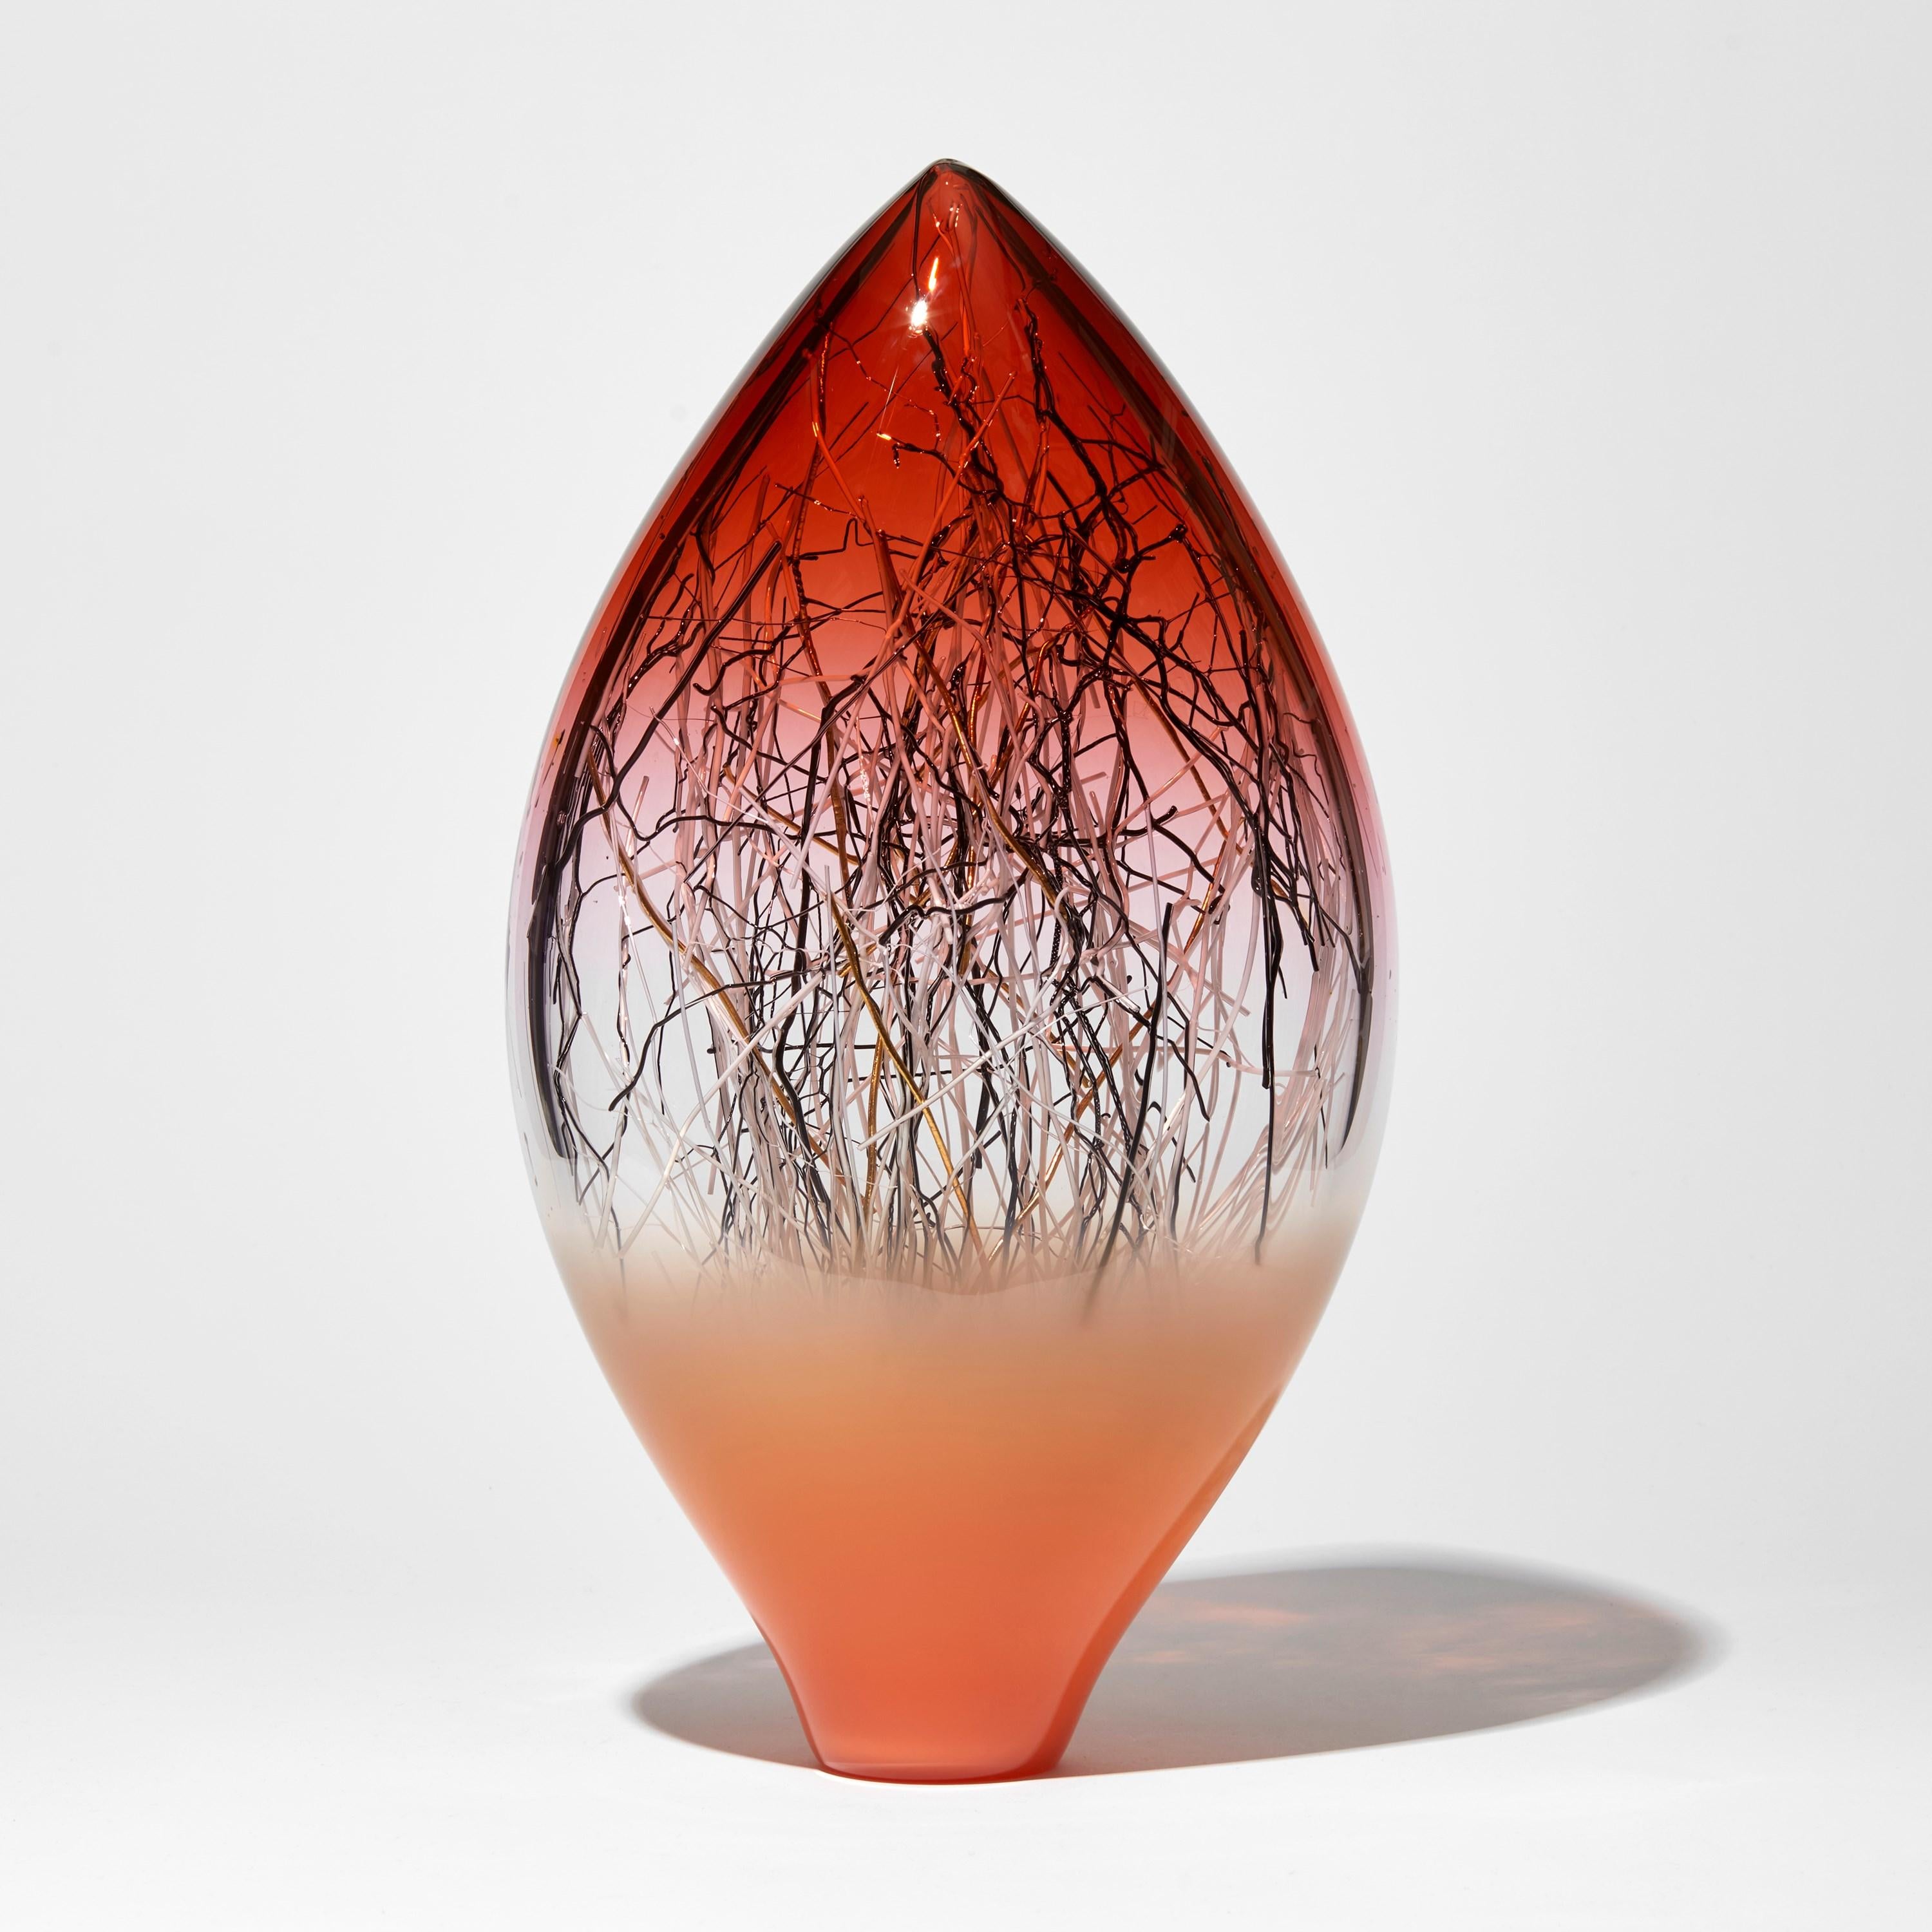 'Ore Eclipse in Salmon & Sunset Red with Gold' is a unique handblown and sculpted glass artwork by the Danish and British artists, Hanne Enemark & Louis Thompson.

Trapped inside the outer ovoid shape are a multitude of glass canes, each reaching